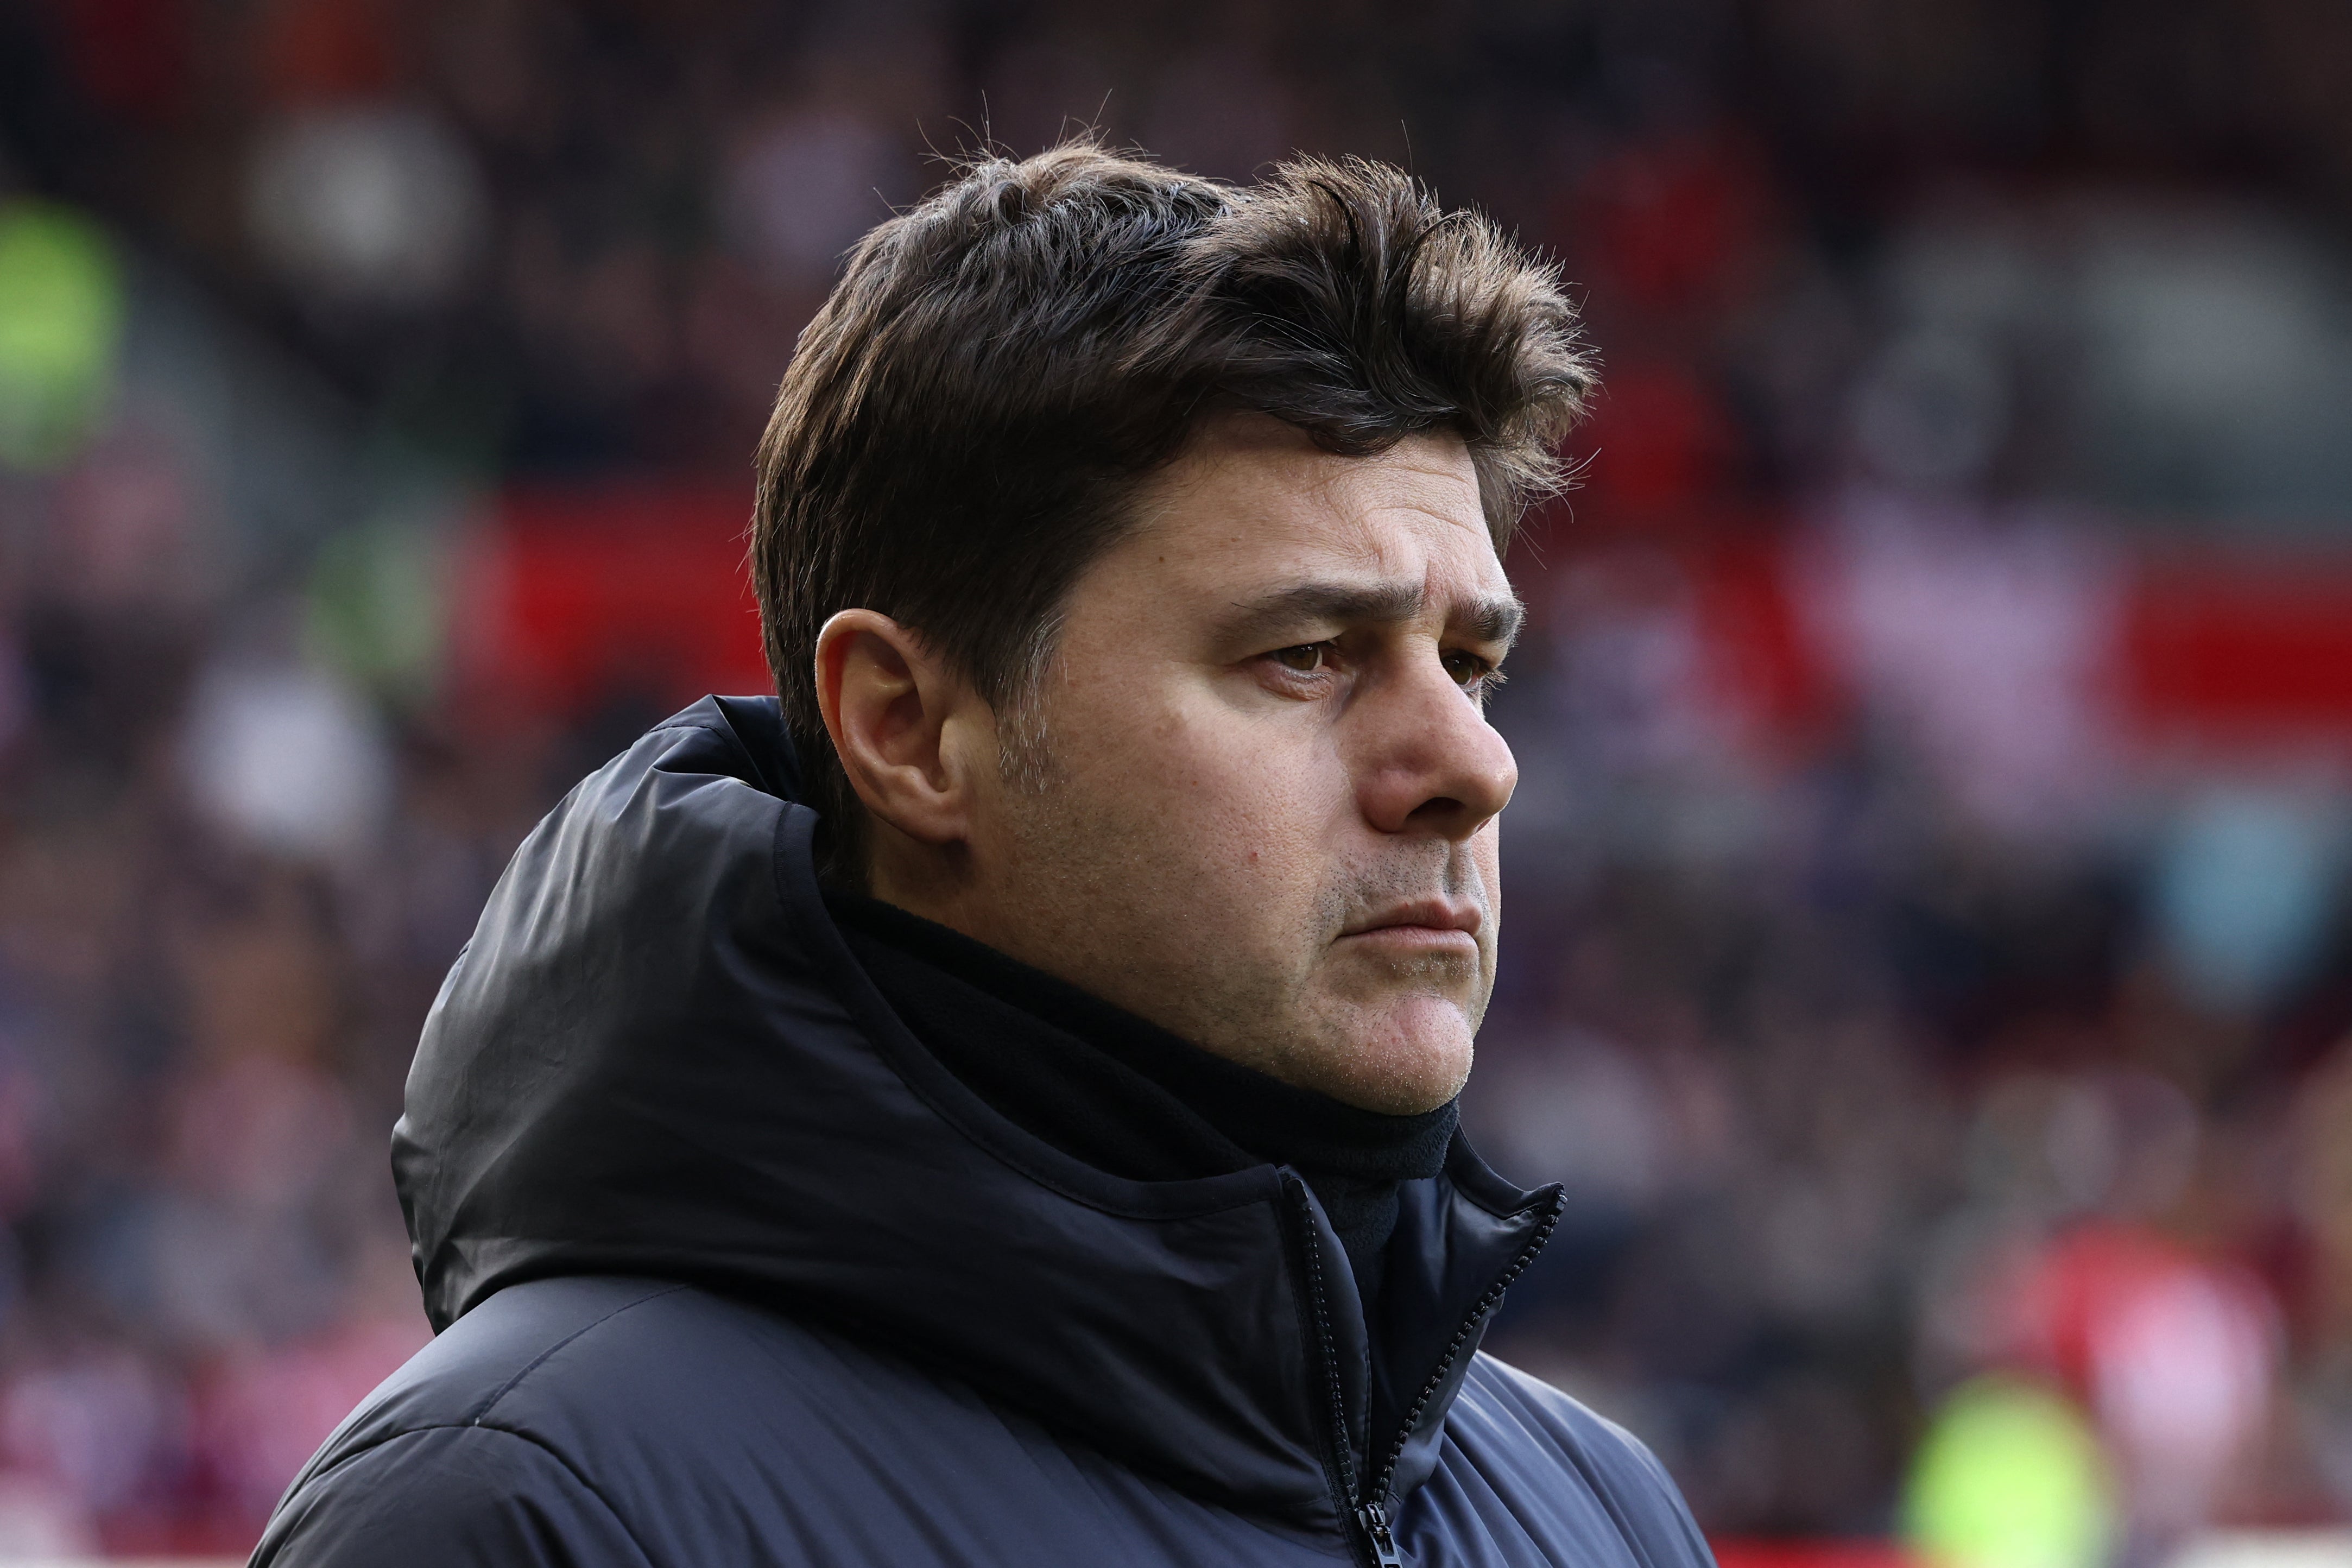 Mauricio Pochettino is under pressure as Chelsea manager